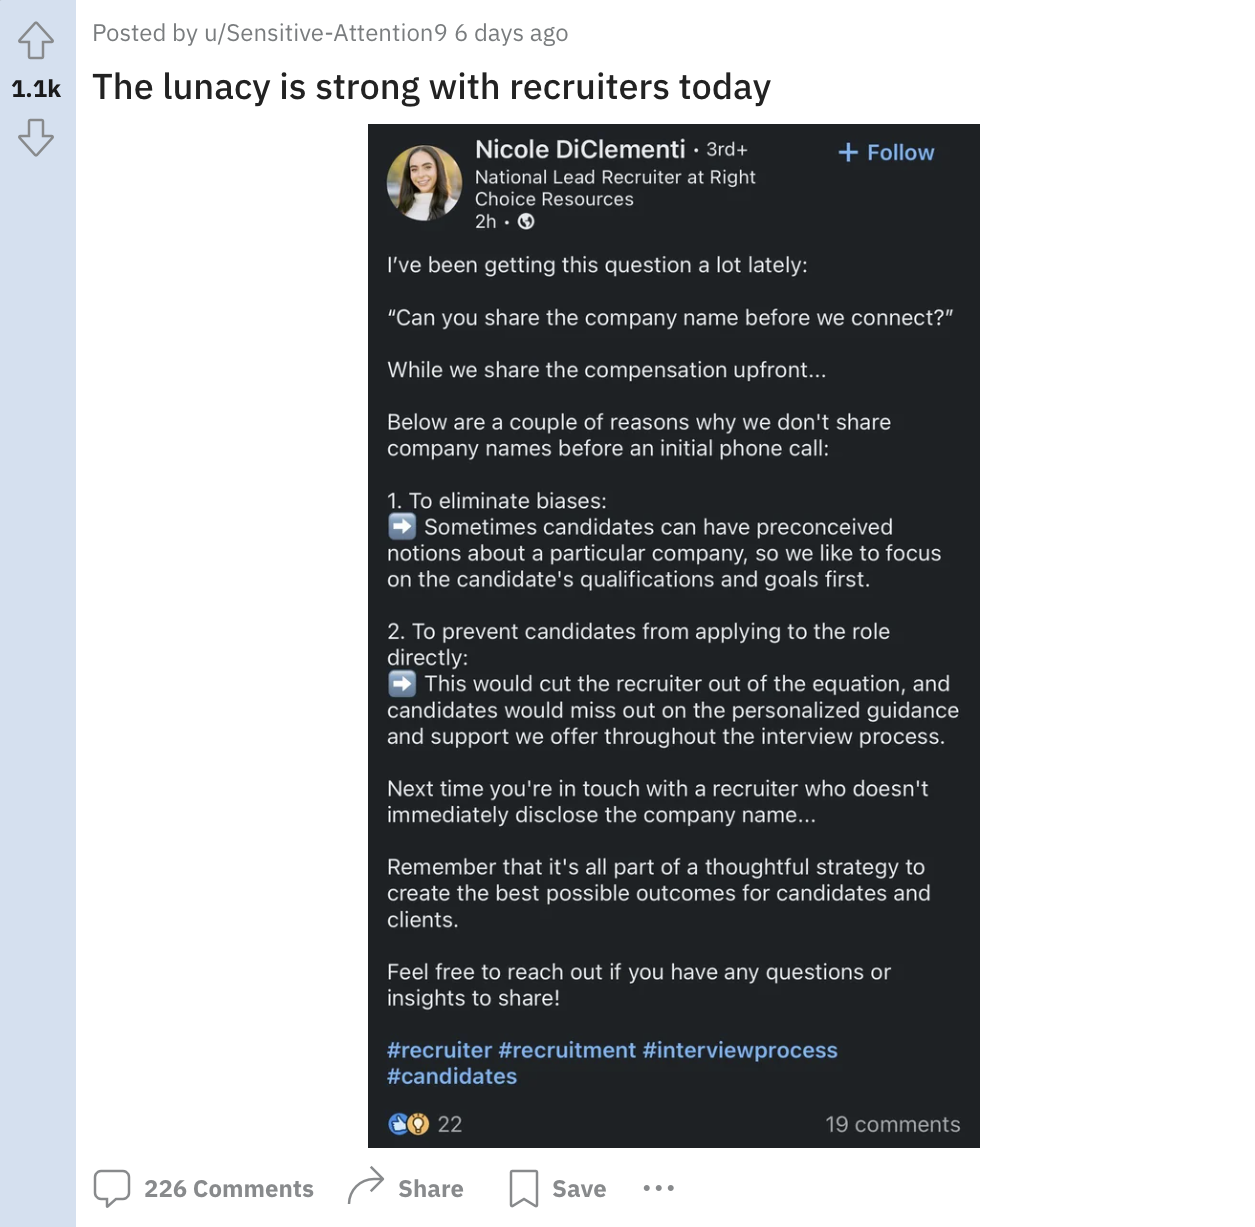 screenshot - Posted by uSensitiveAttention9 6 days ago The lunacy is strong with recruiters today Nicole DiClementi 3rd National Lead Recruiter at Right Choice Resources 2h I've been getting this question a lot lately "Can you the company name before we c